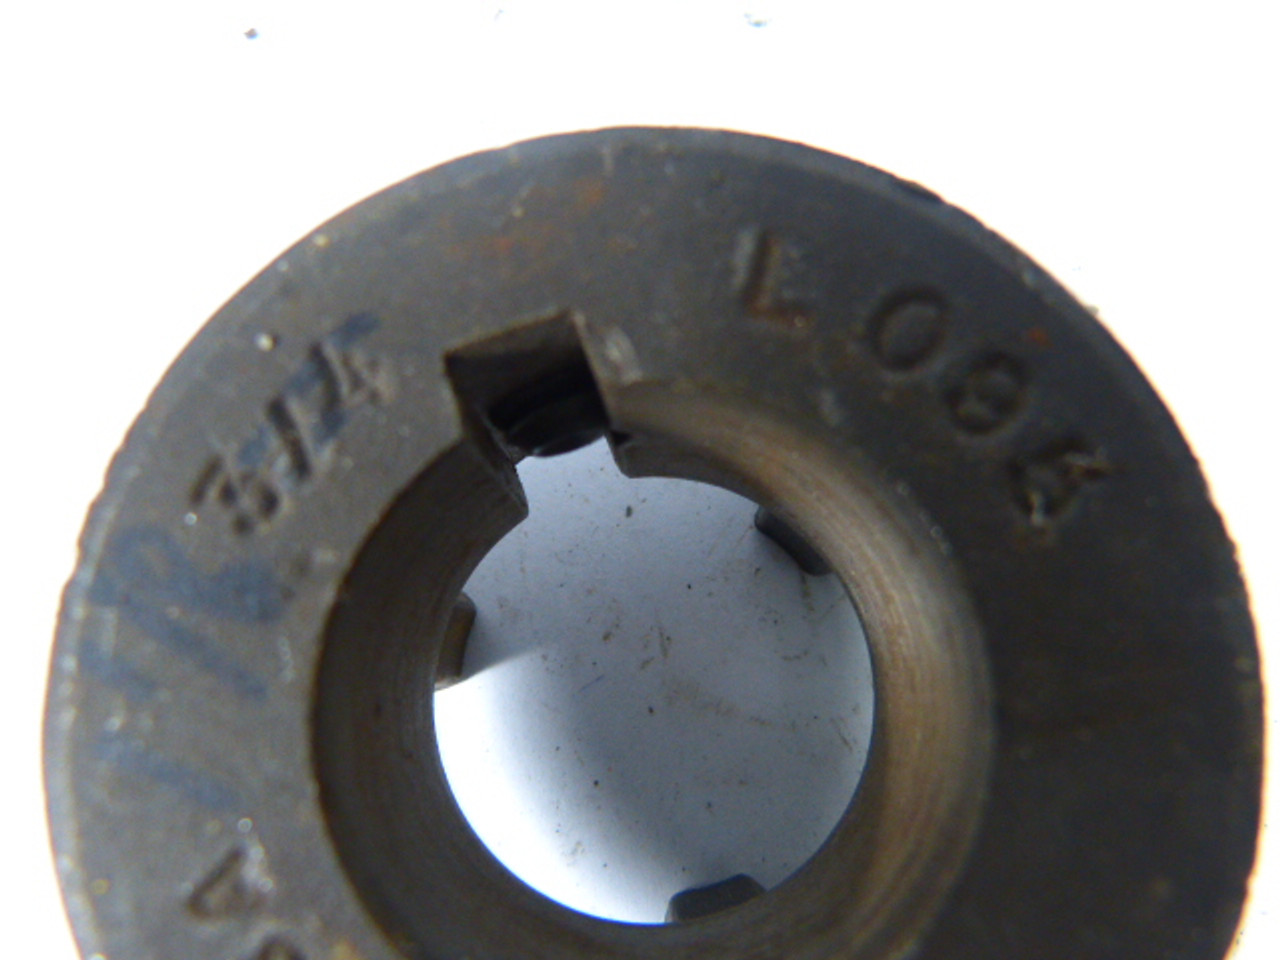 Woods L095-3/4 Motor Shaft Jaw Coupling USED